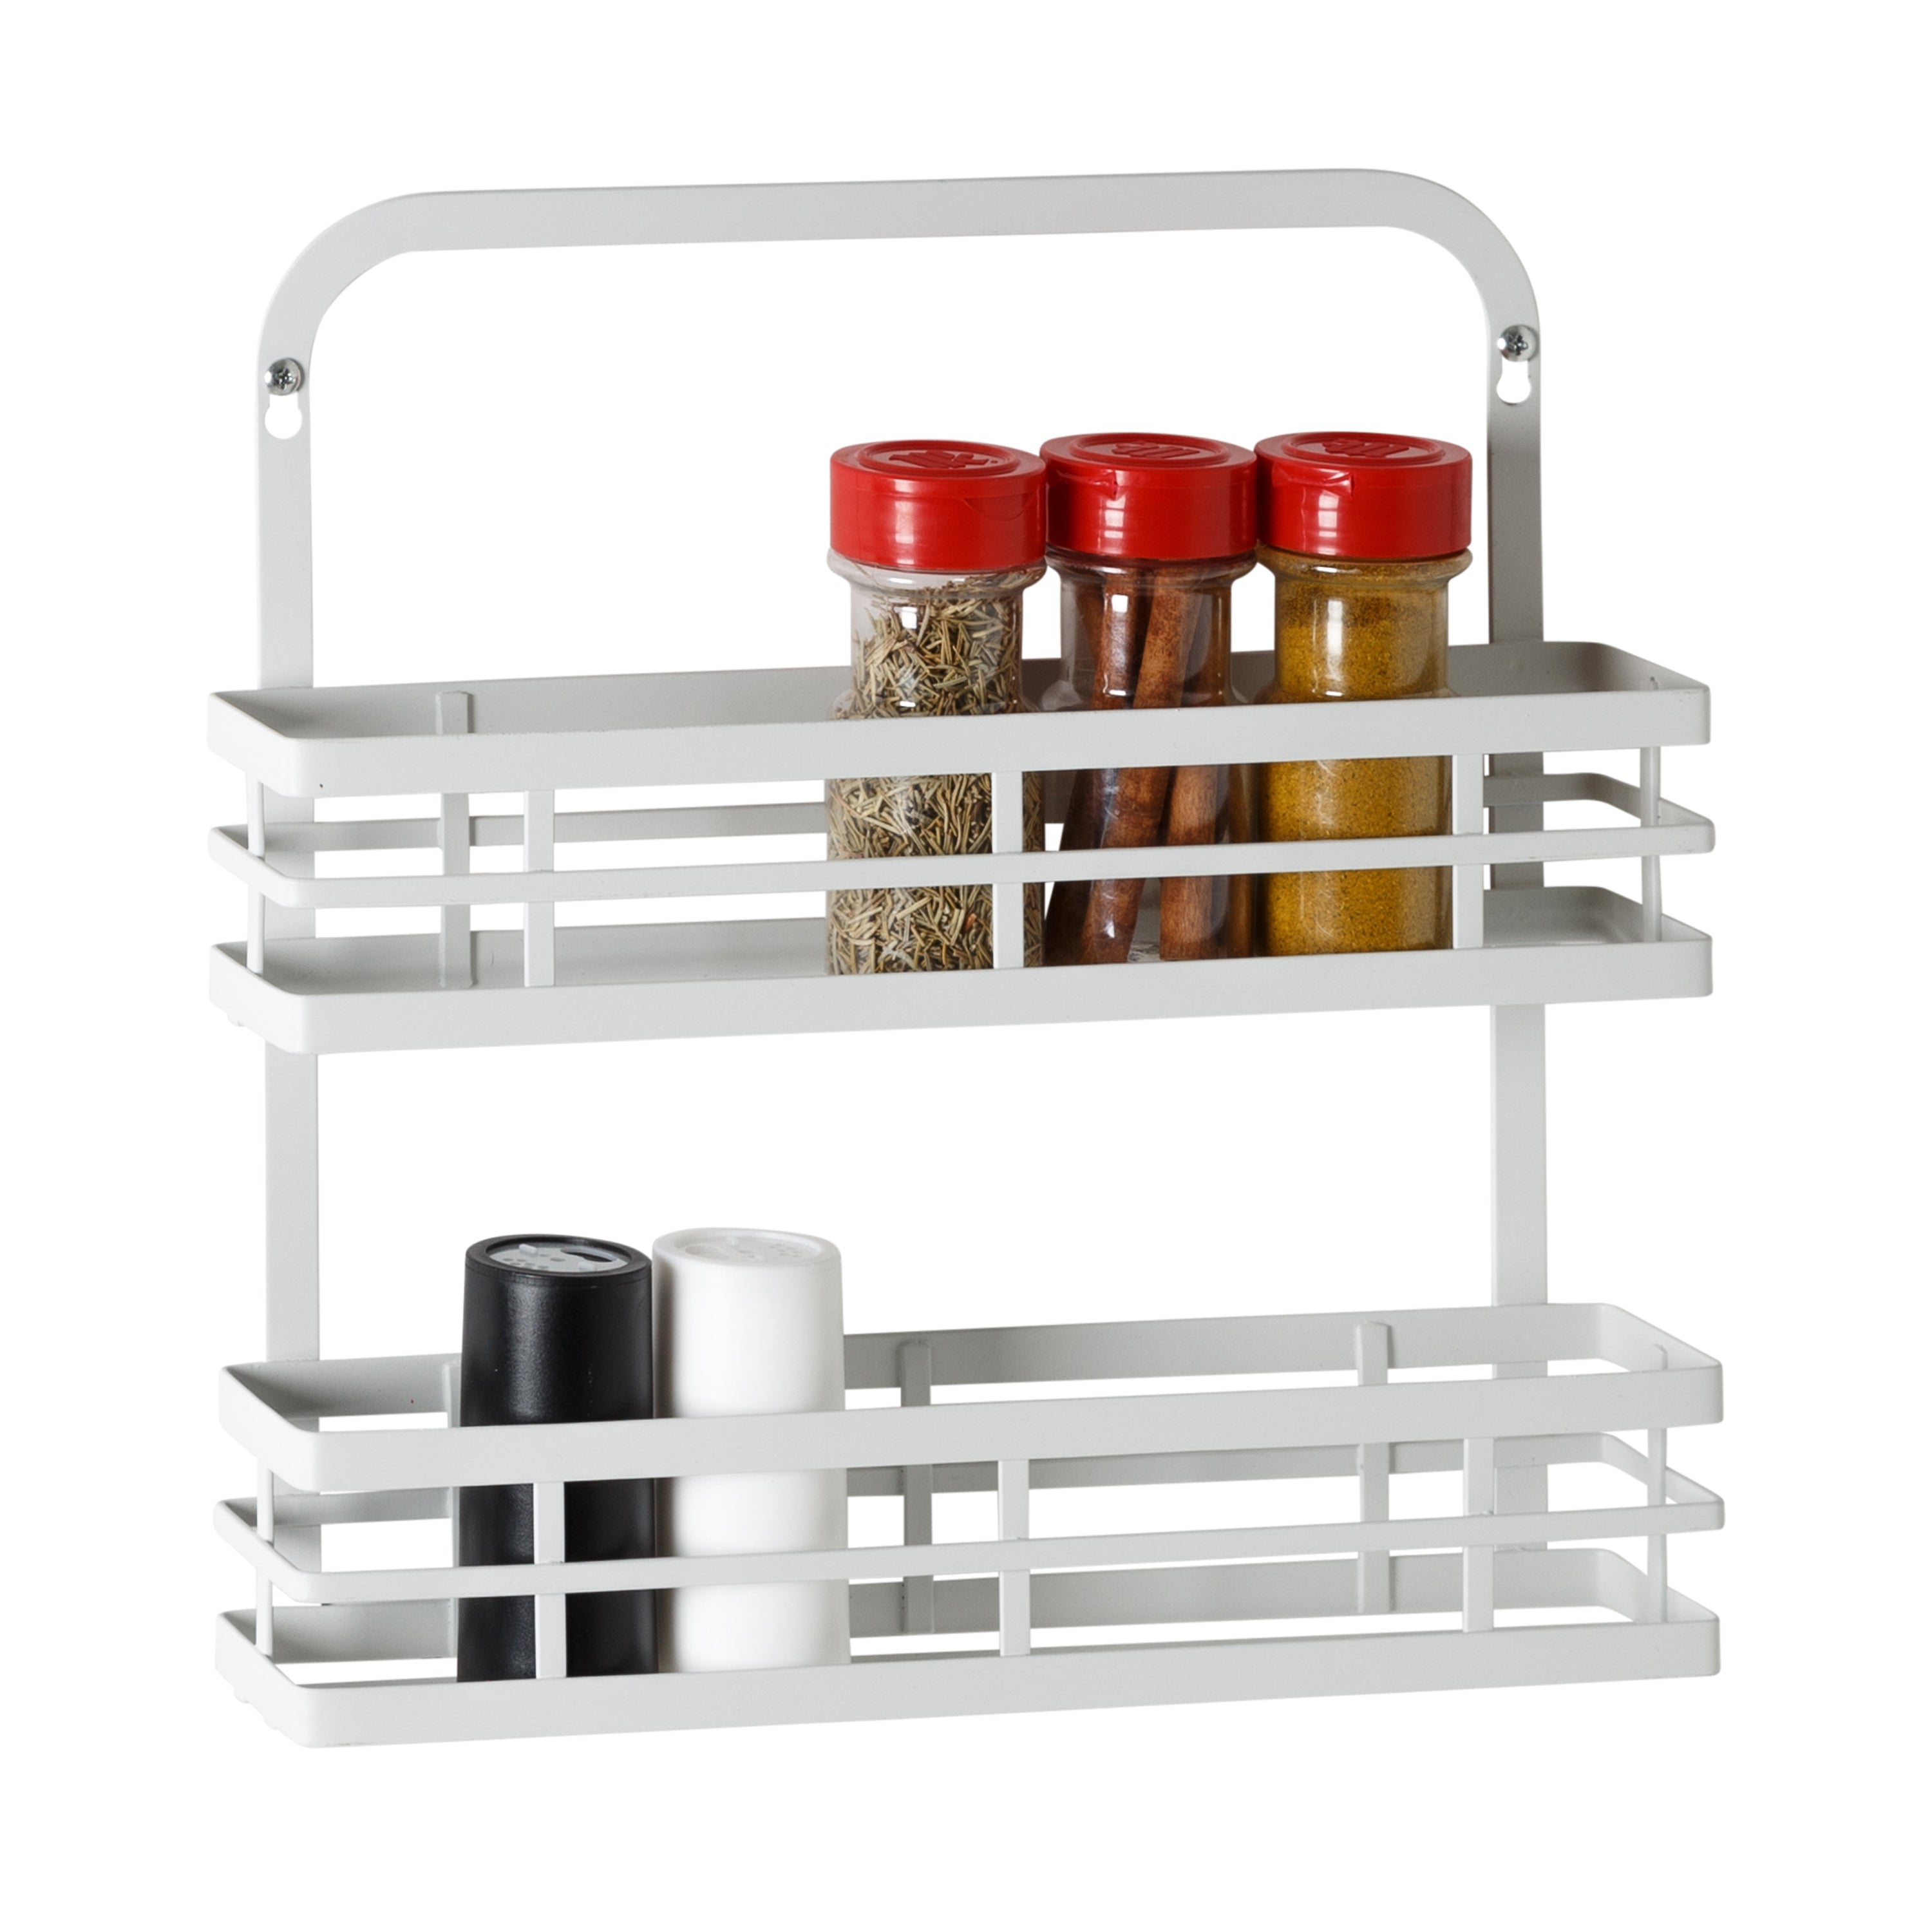 Honey Can Do Paper Towel Holder with Steel Spice Rack - White